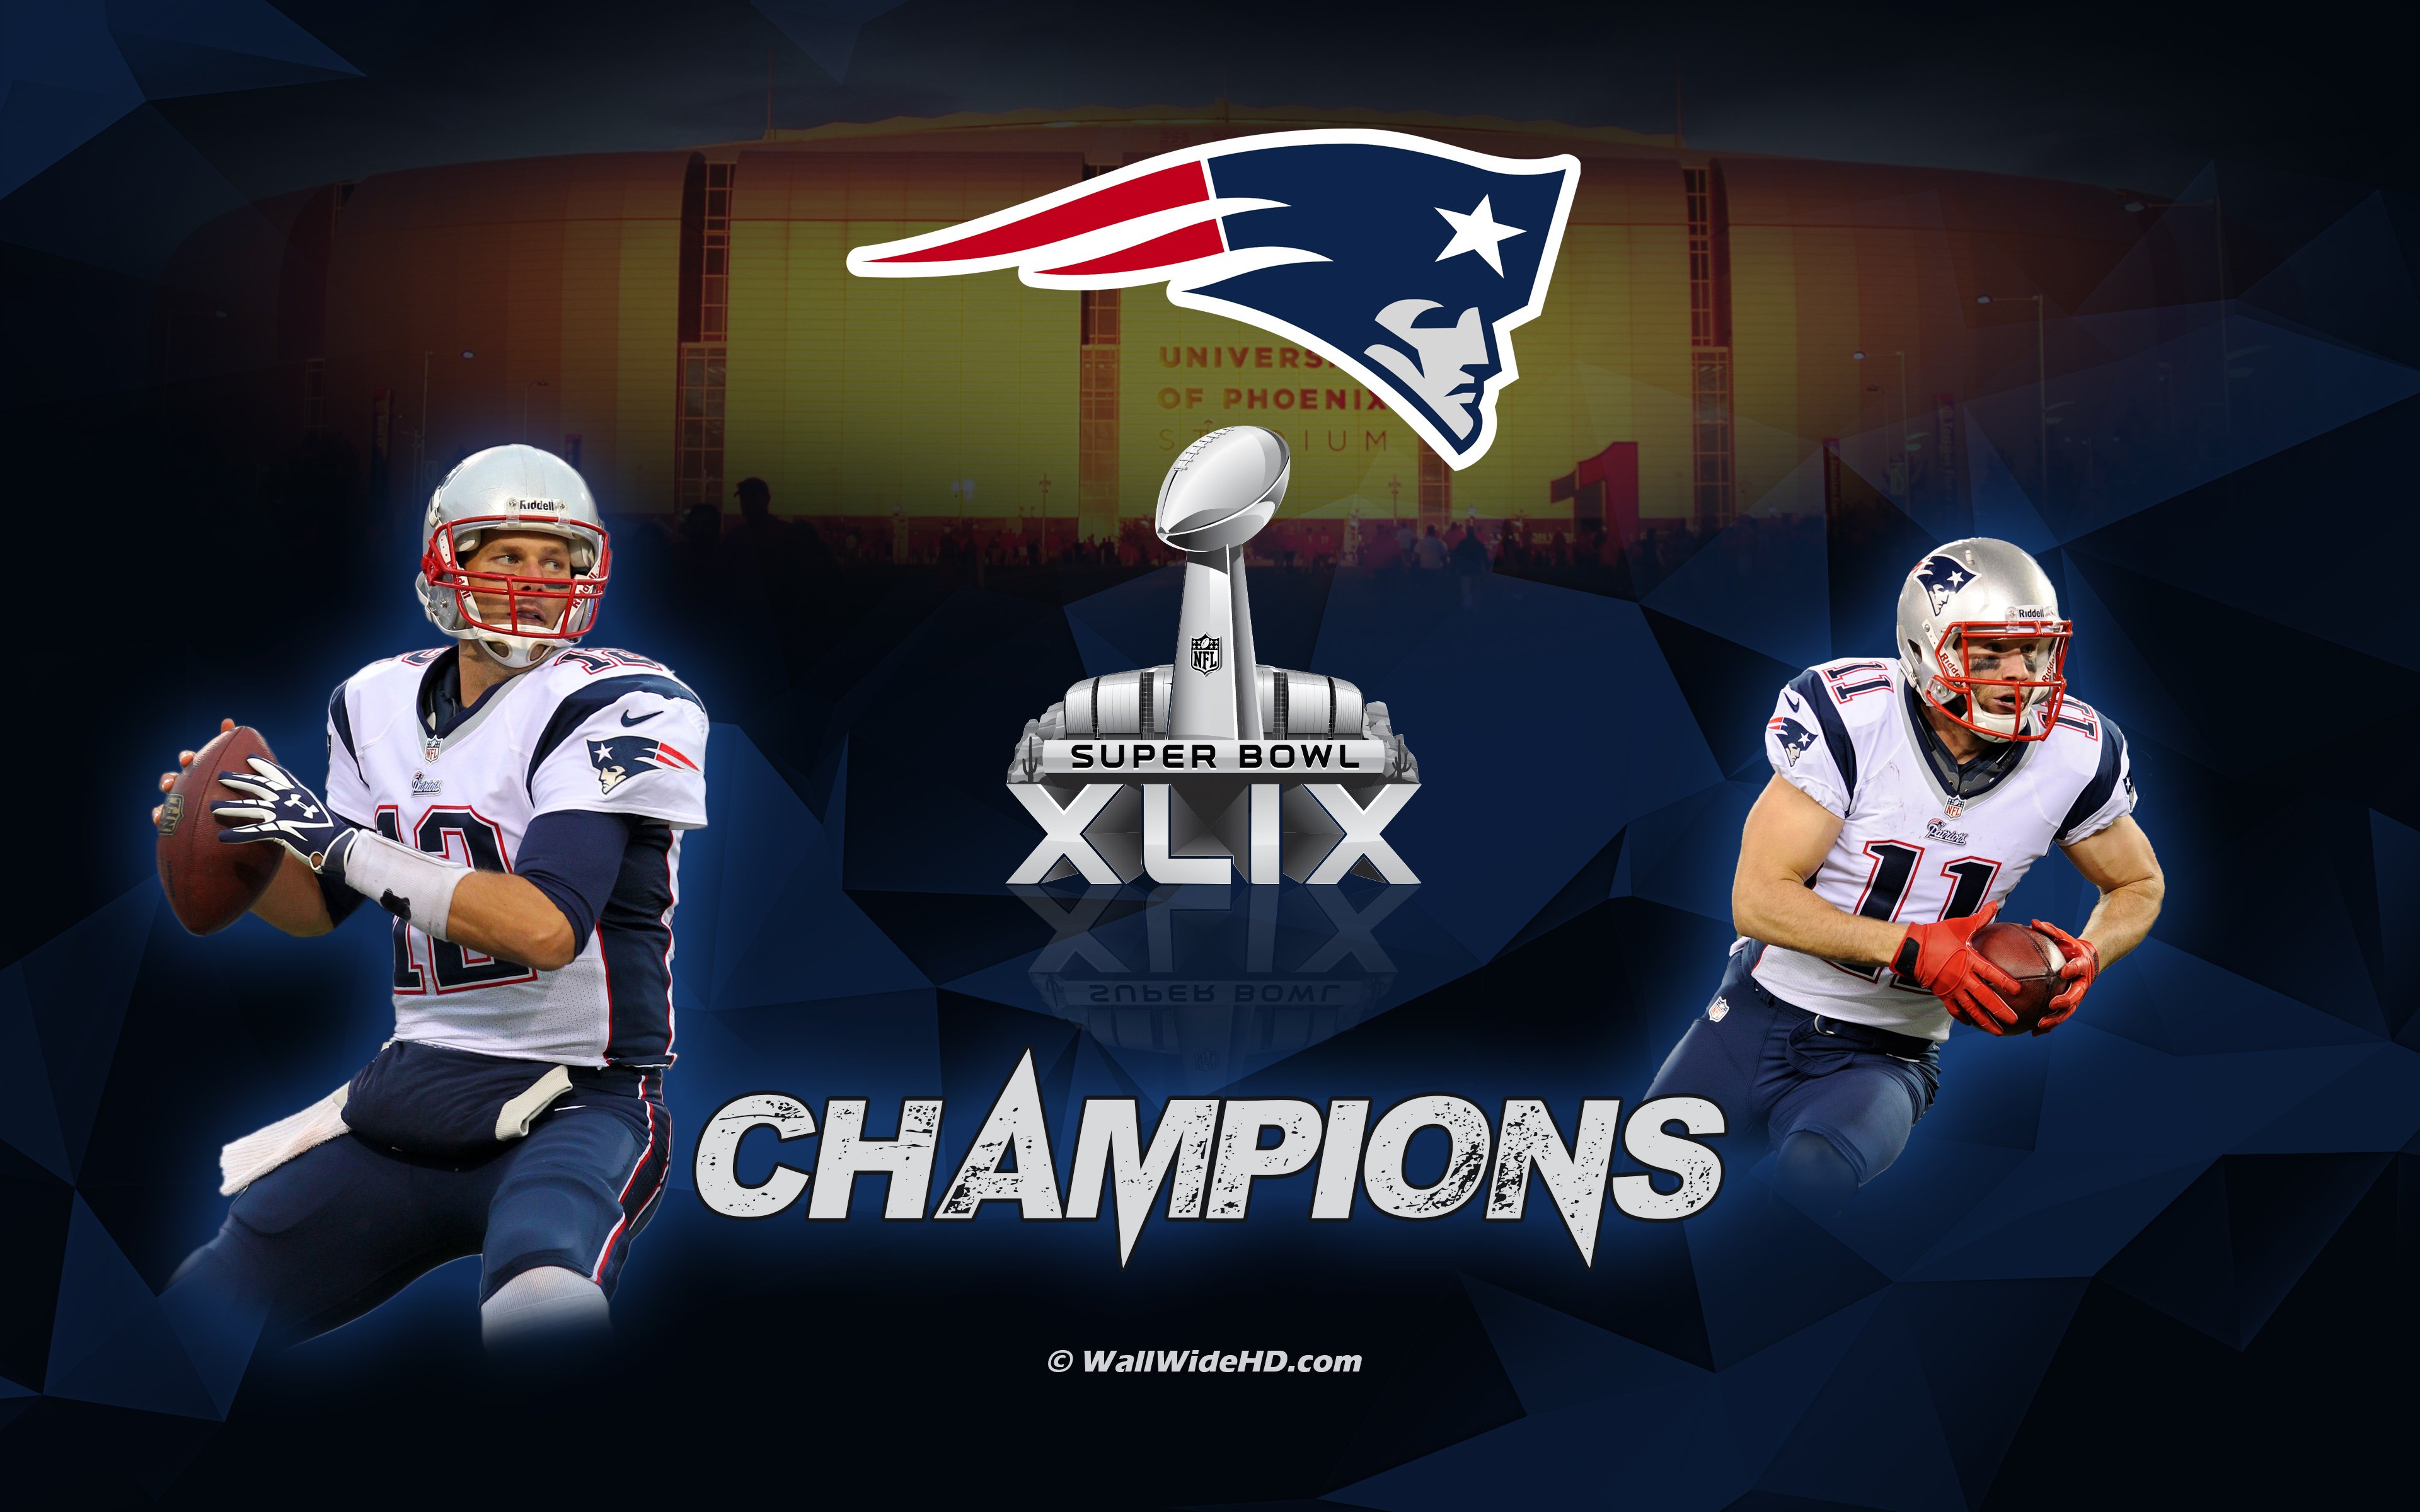 SUPER BOWL 2016 WALLPAPERS FREE Wallpapers Background images